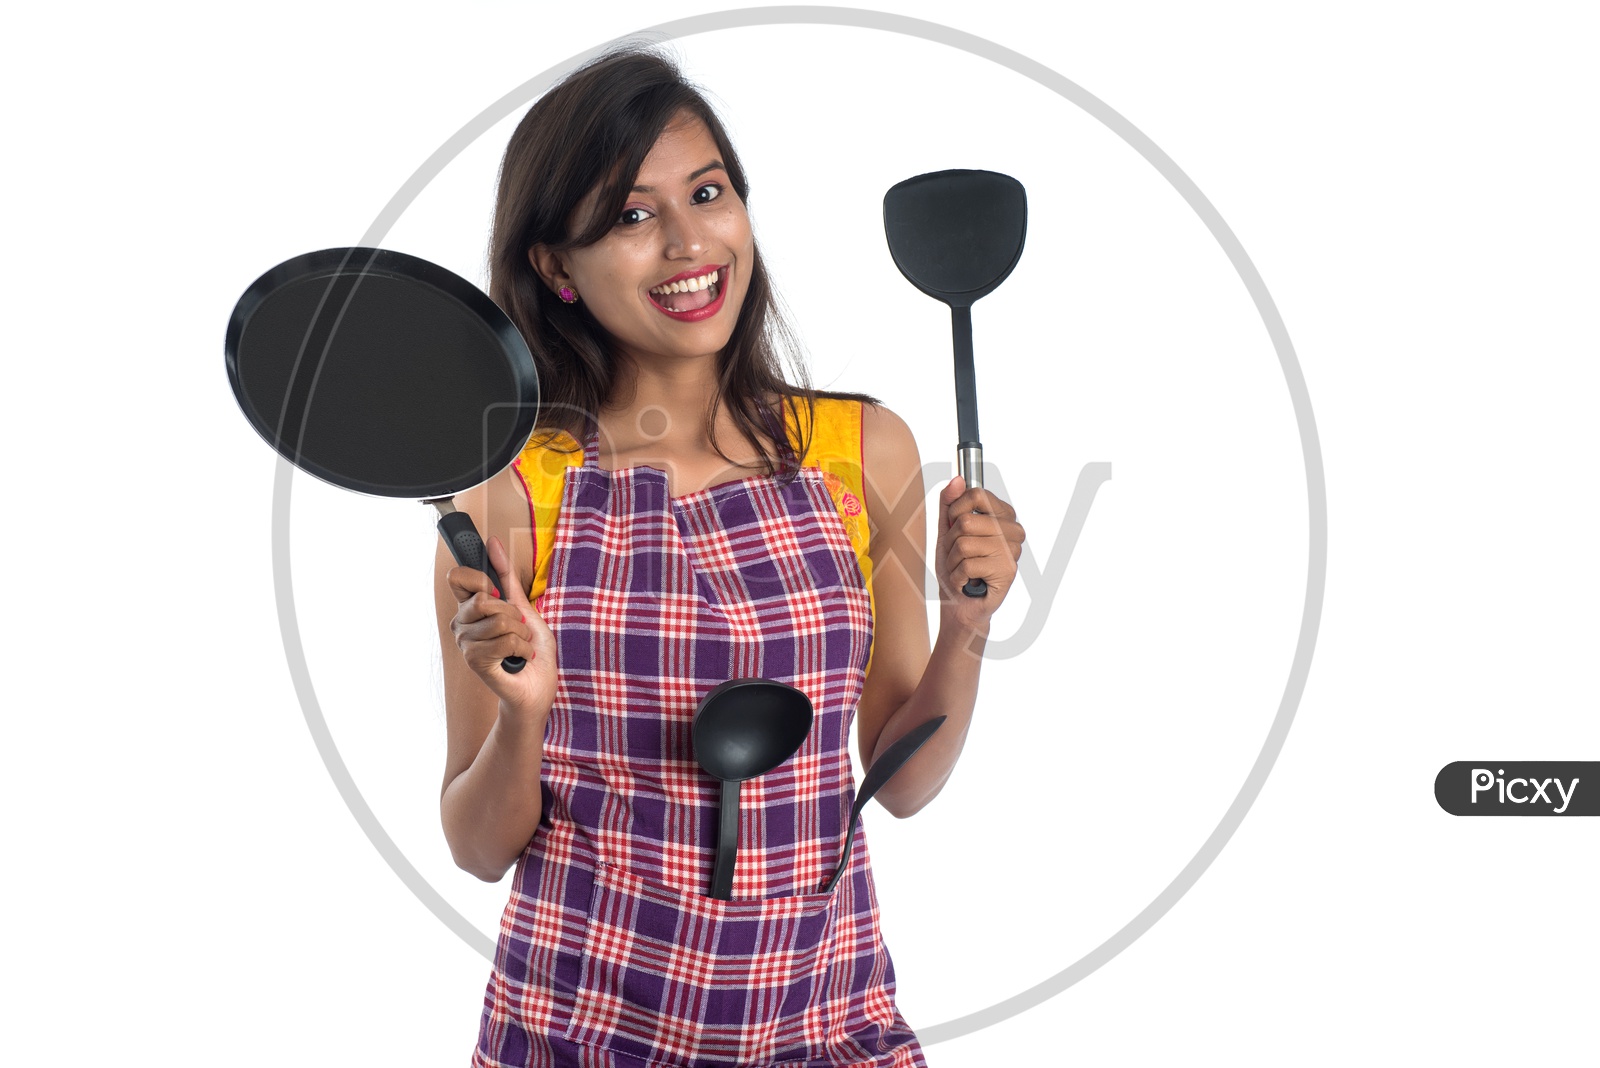 Young Indian Woman Or House Wife Or Girl With Cooking utensils And Posing On an Isolated White background